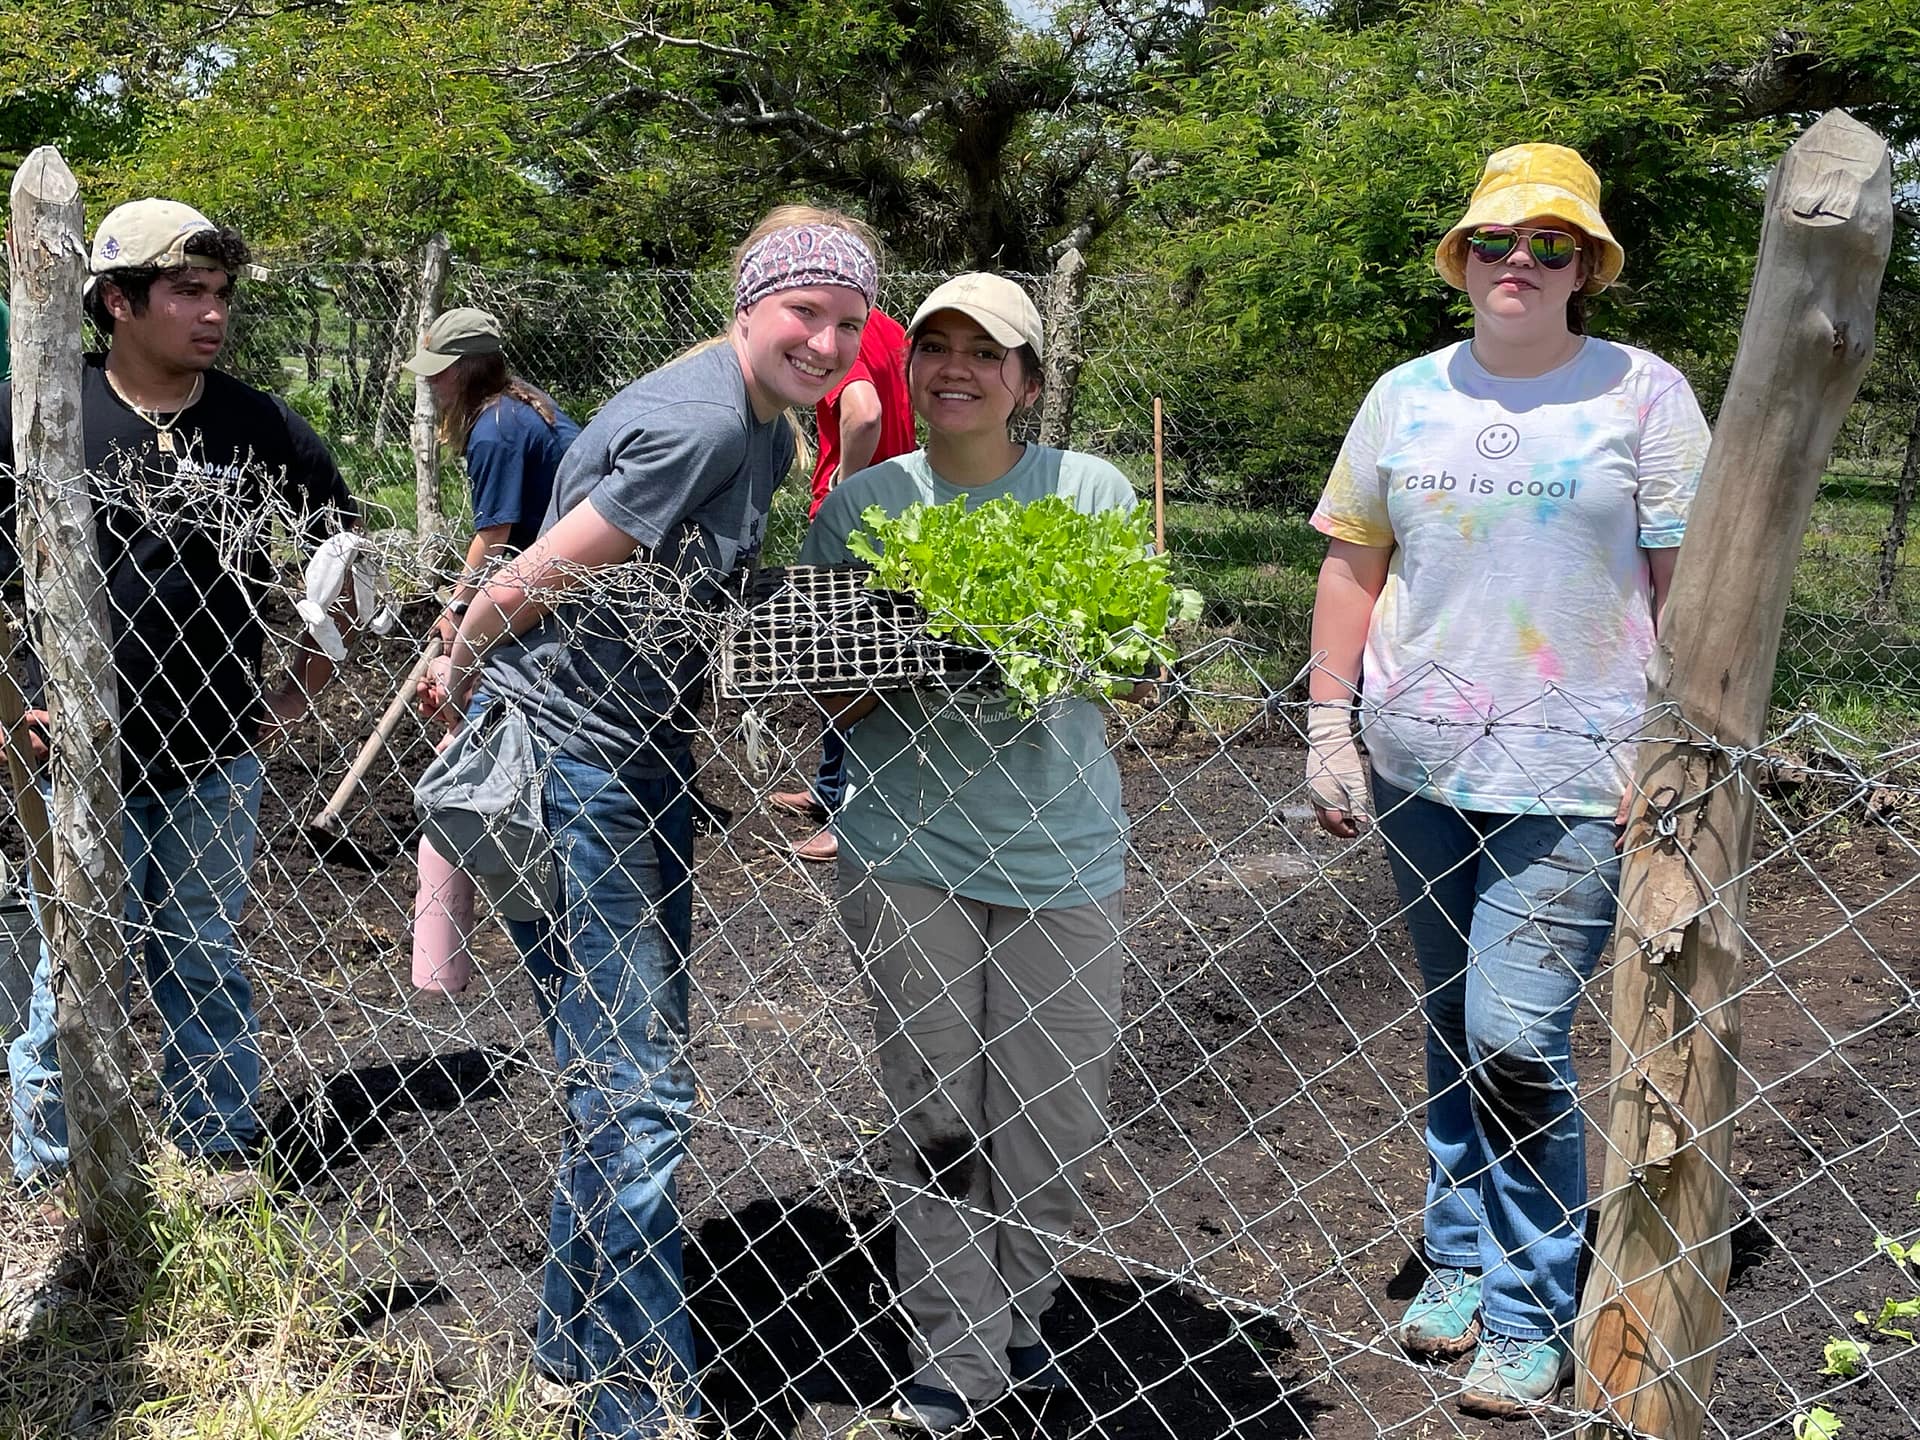 Students from the Department of Agricultural and Environmental Sciences work on a sustainable organic garden for Mision Para Cristo, a ministry run by ACU alumni Travis (’96) and Mindy (Holloway ’01) Stewart. From left are Gerald Zuniga, Grace Russell, Brianna Jaquez and Julie Sauceda.